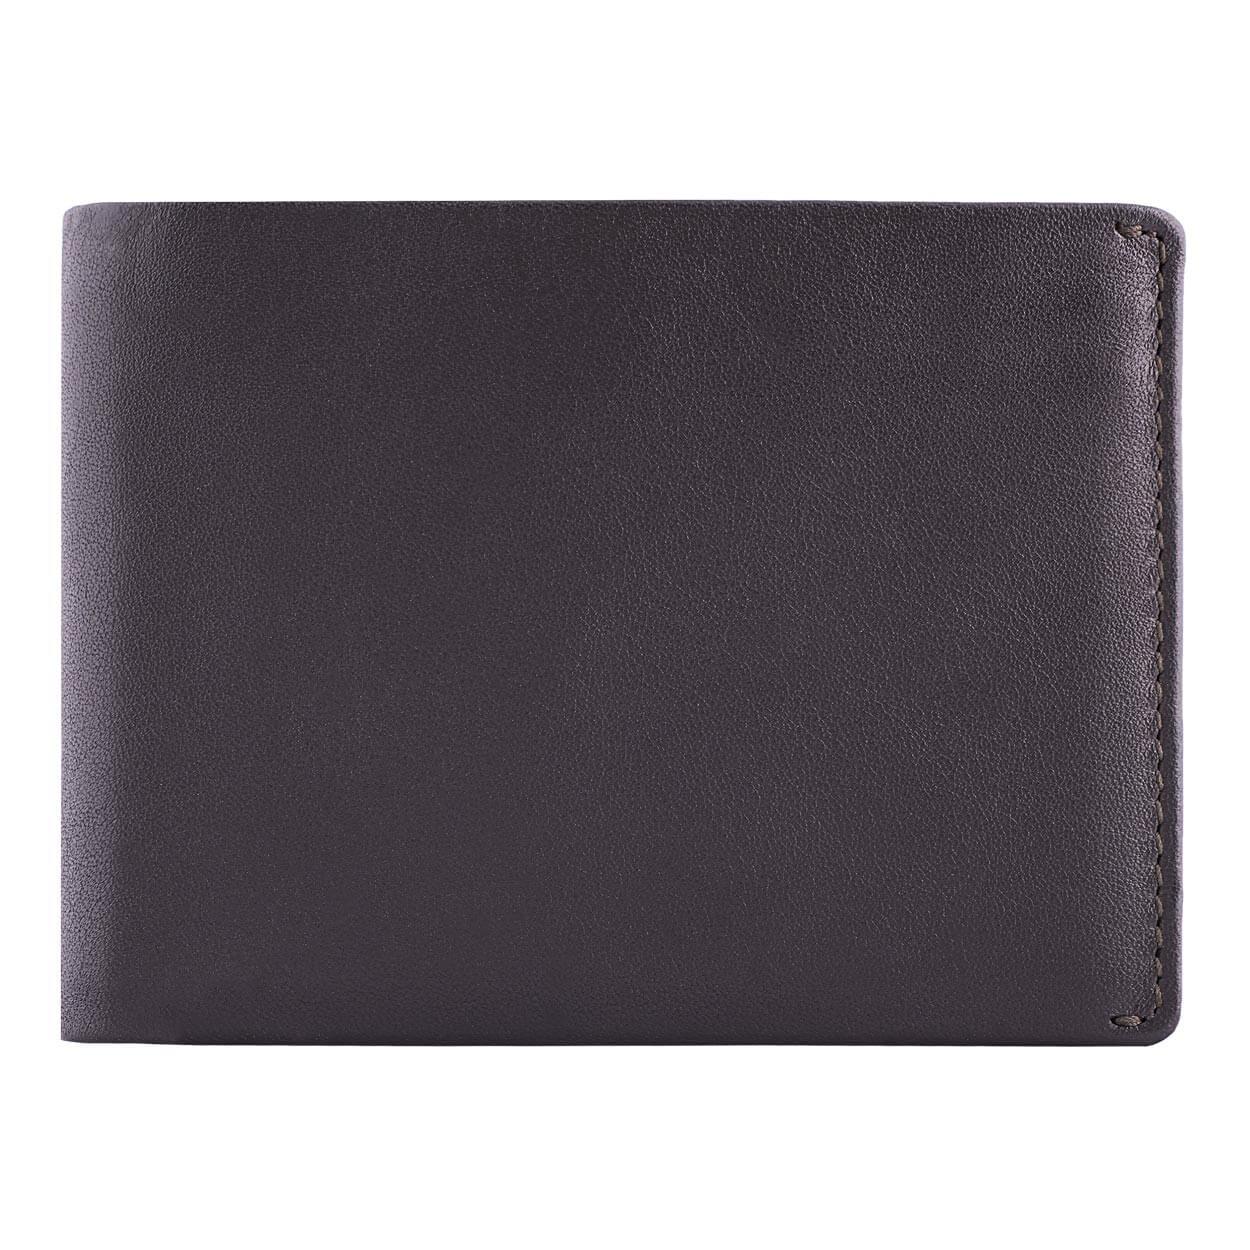 Leatherology Black Oil Men's Bifold Wallet with Card Flap ID Window - RFID Available